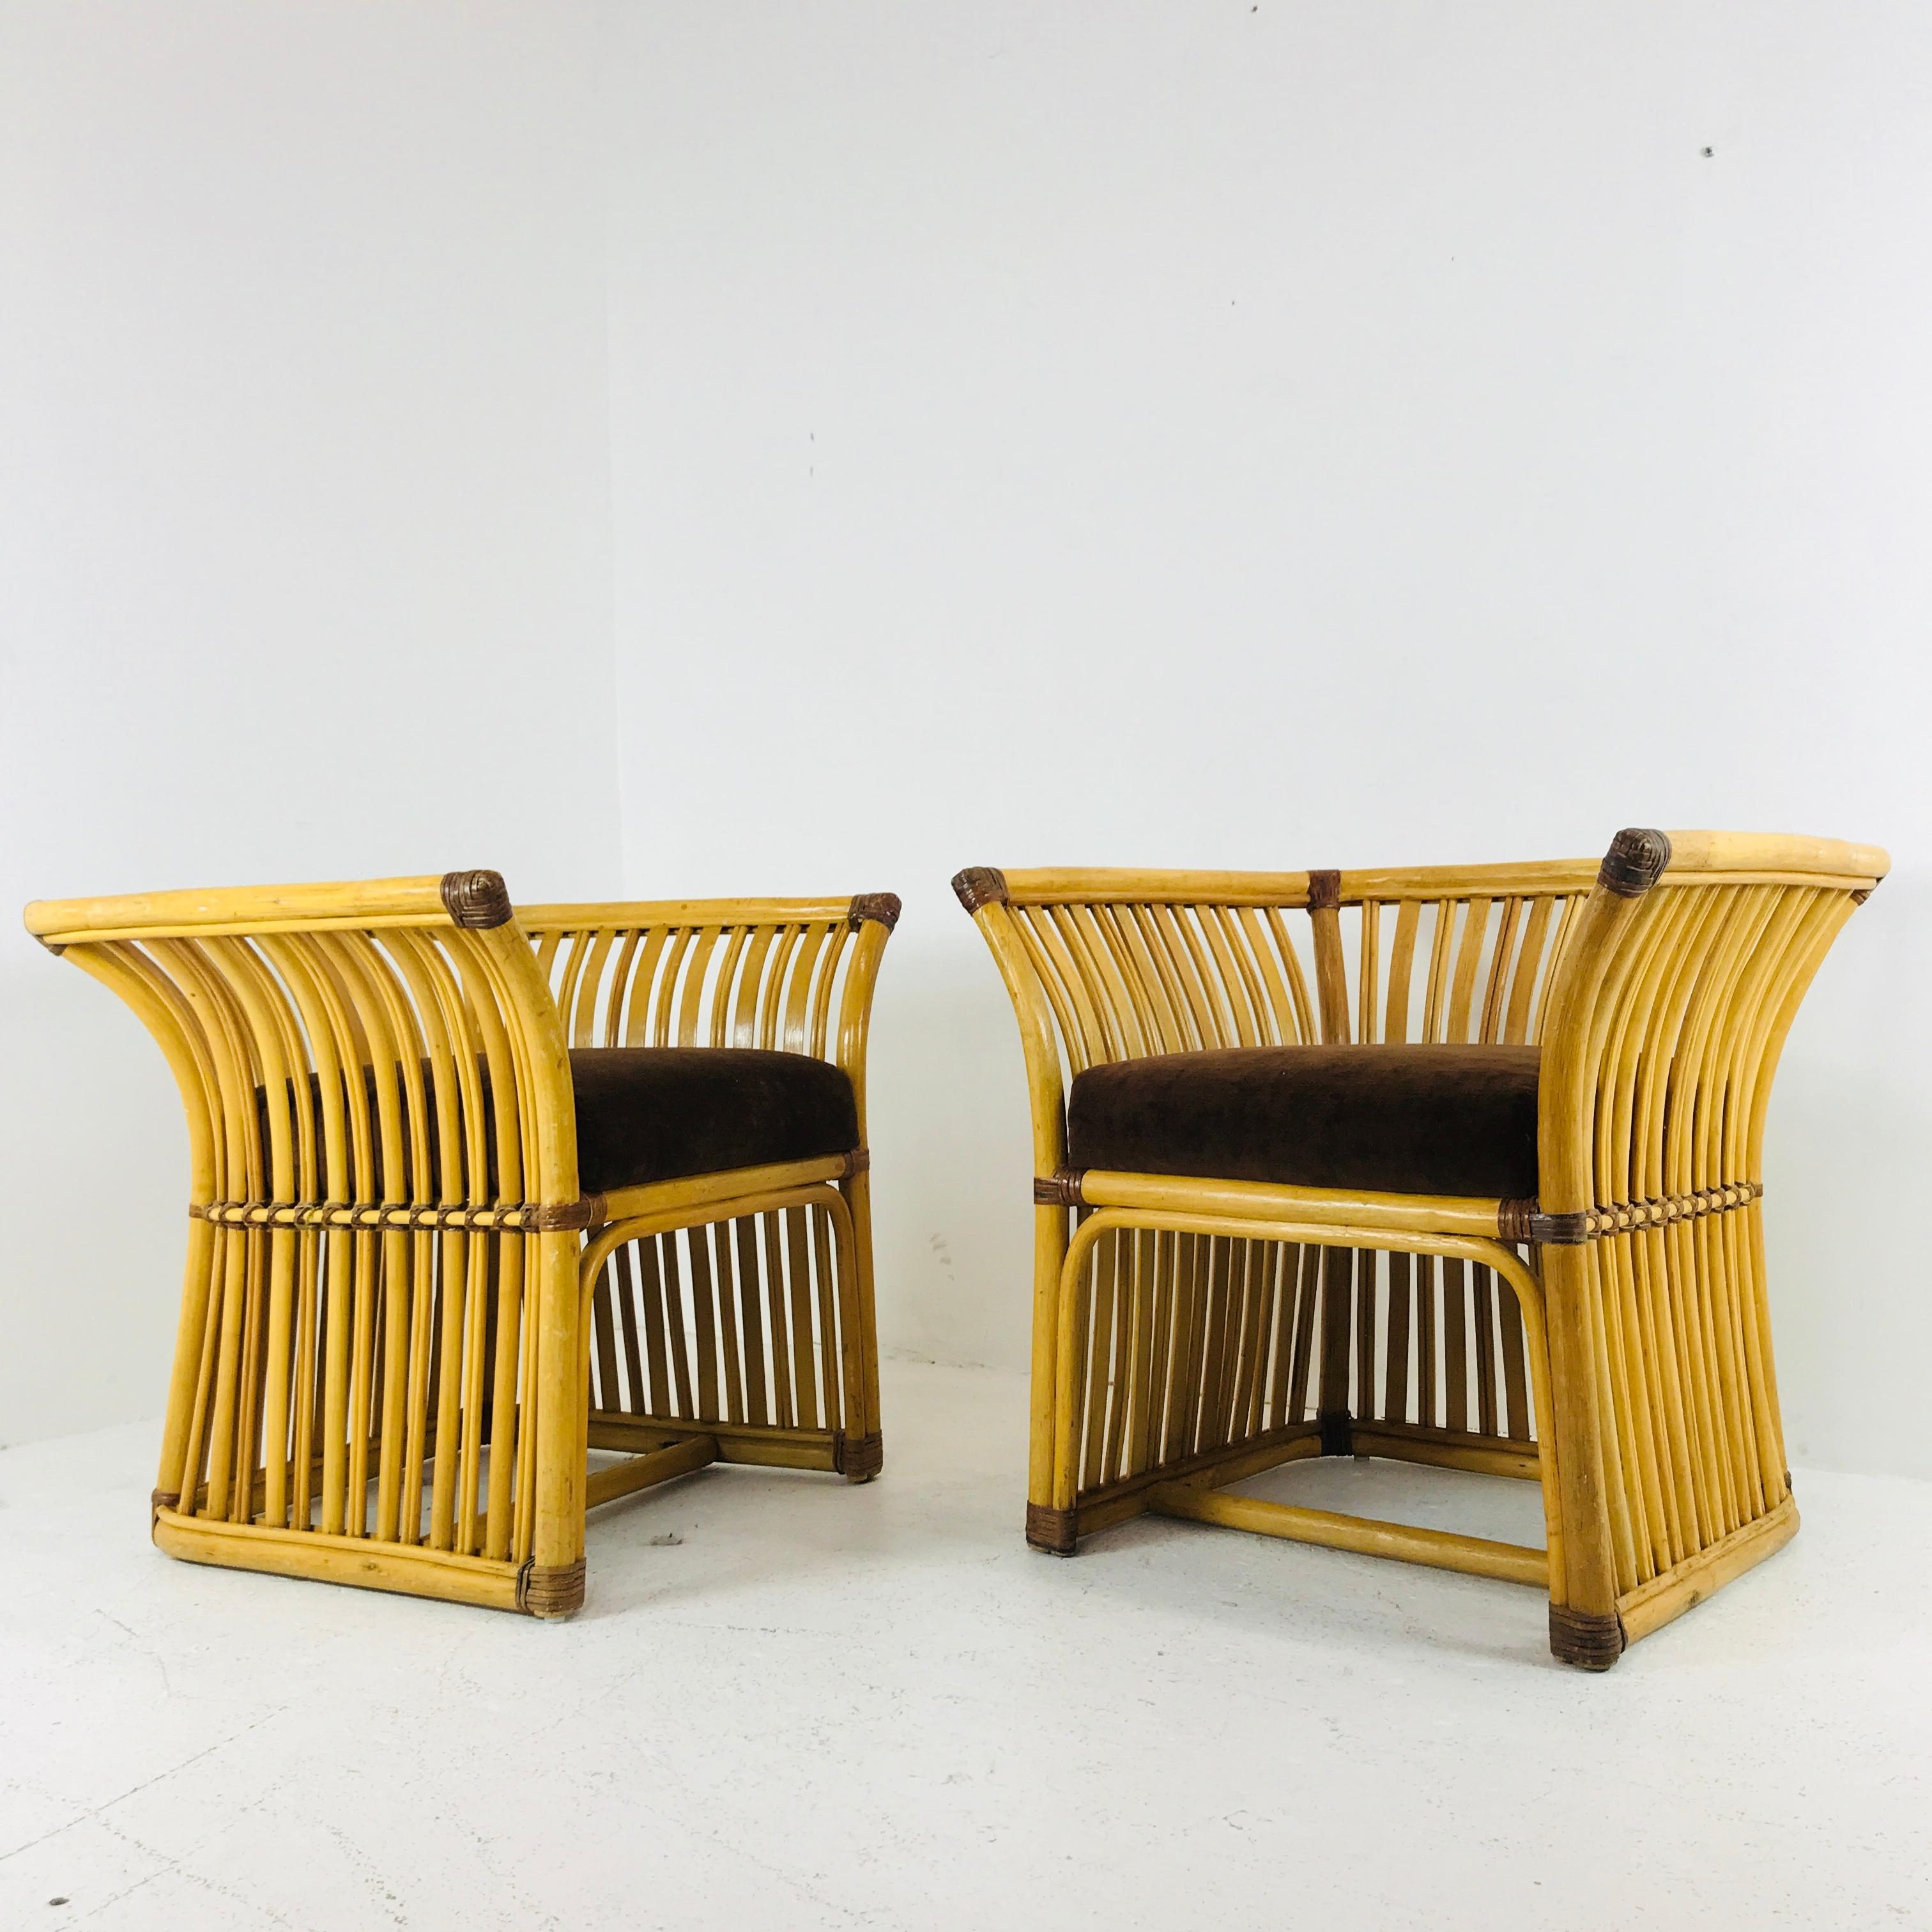 Pair of very handsome McGuire style lounge chairs. Chairs are in good condition with wear due to age and use. 

dimensions:
29.5